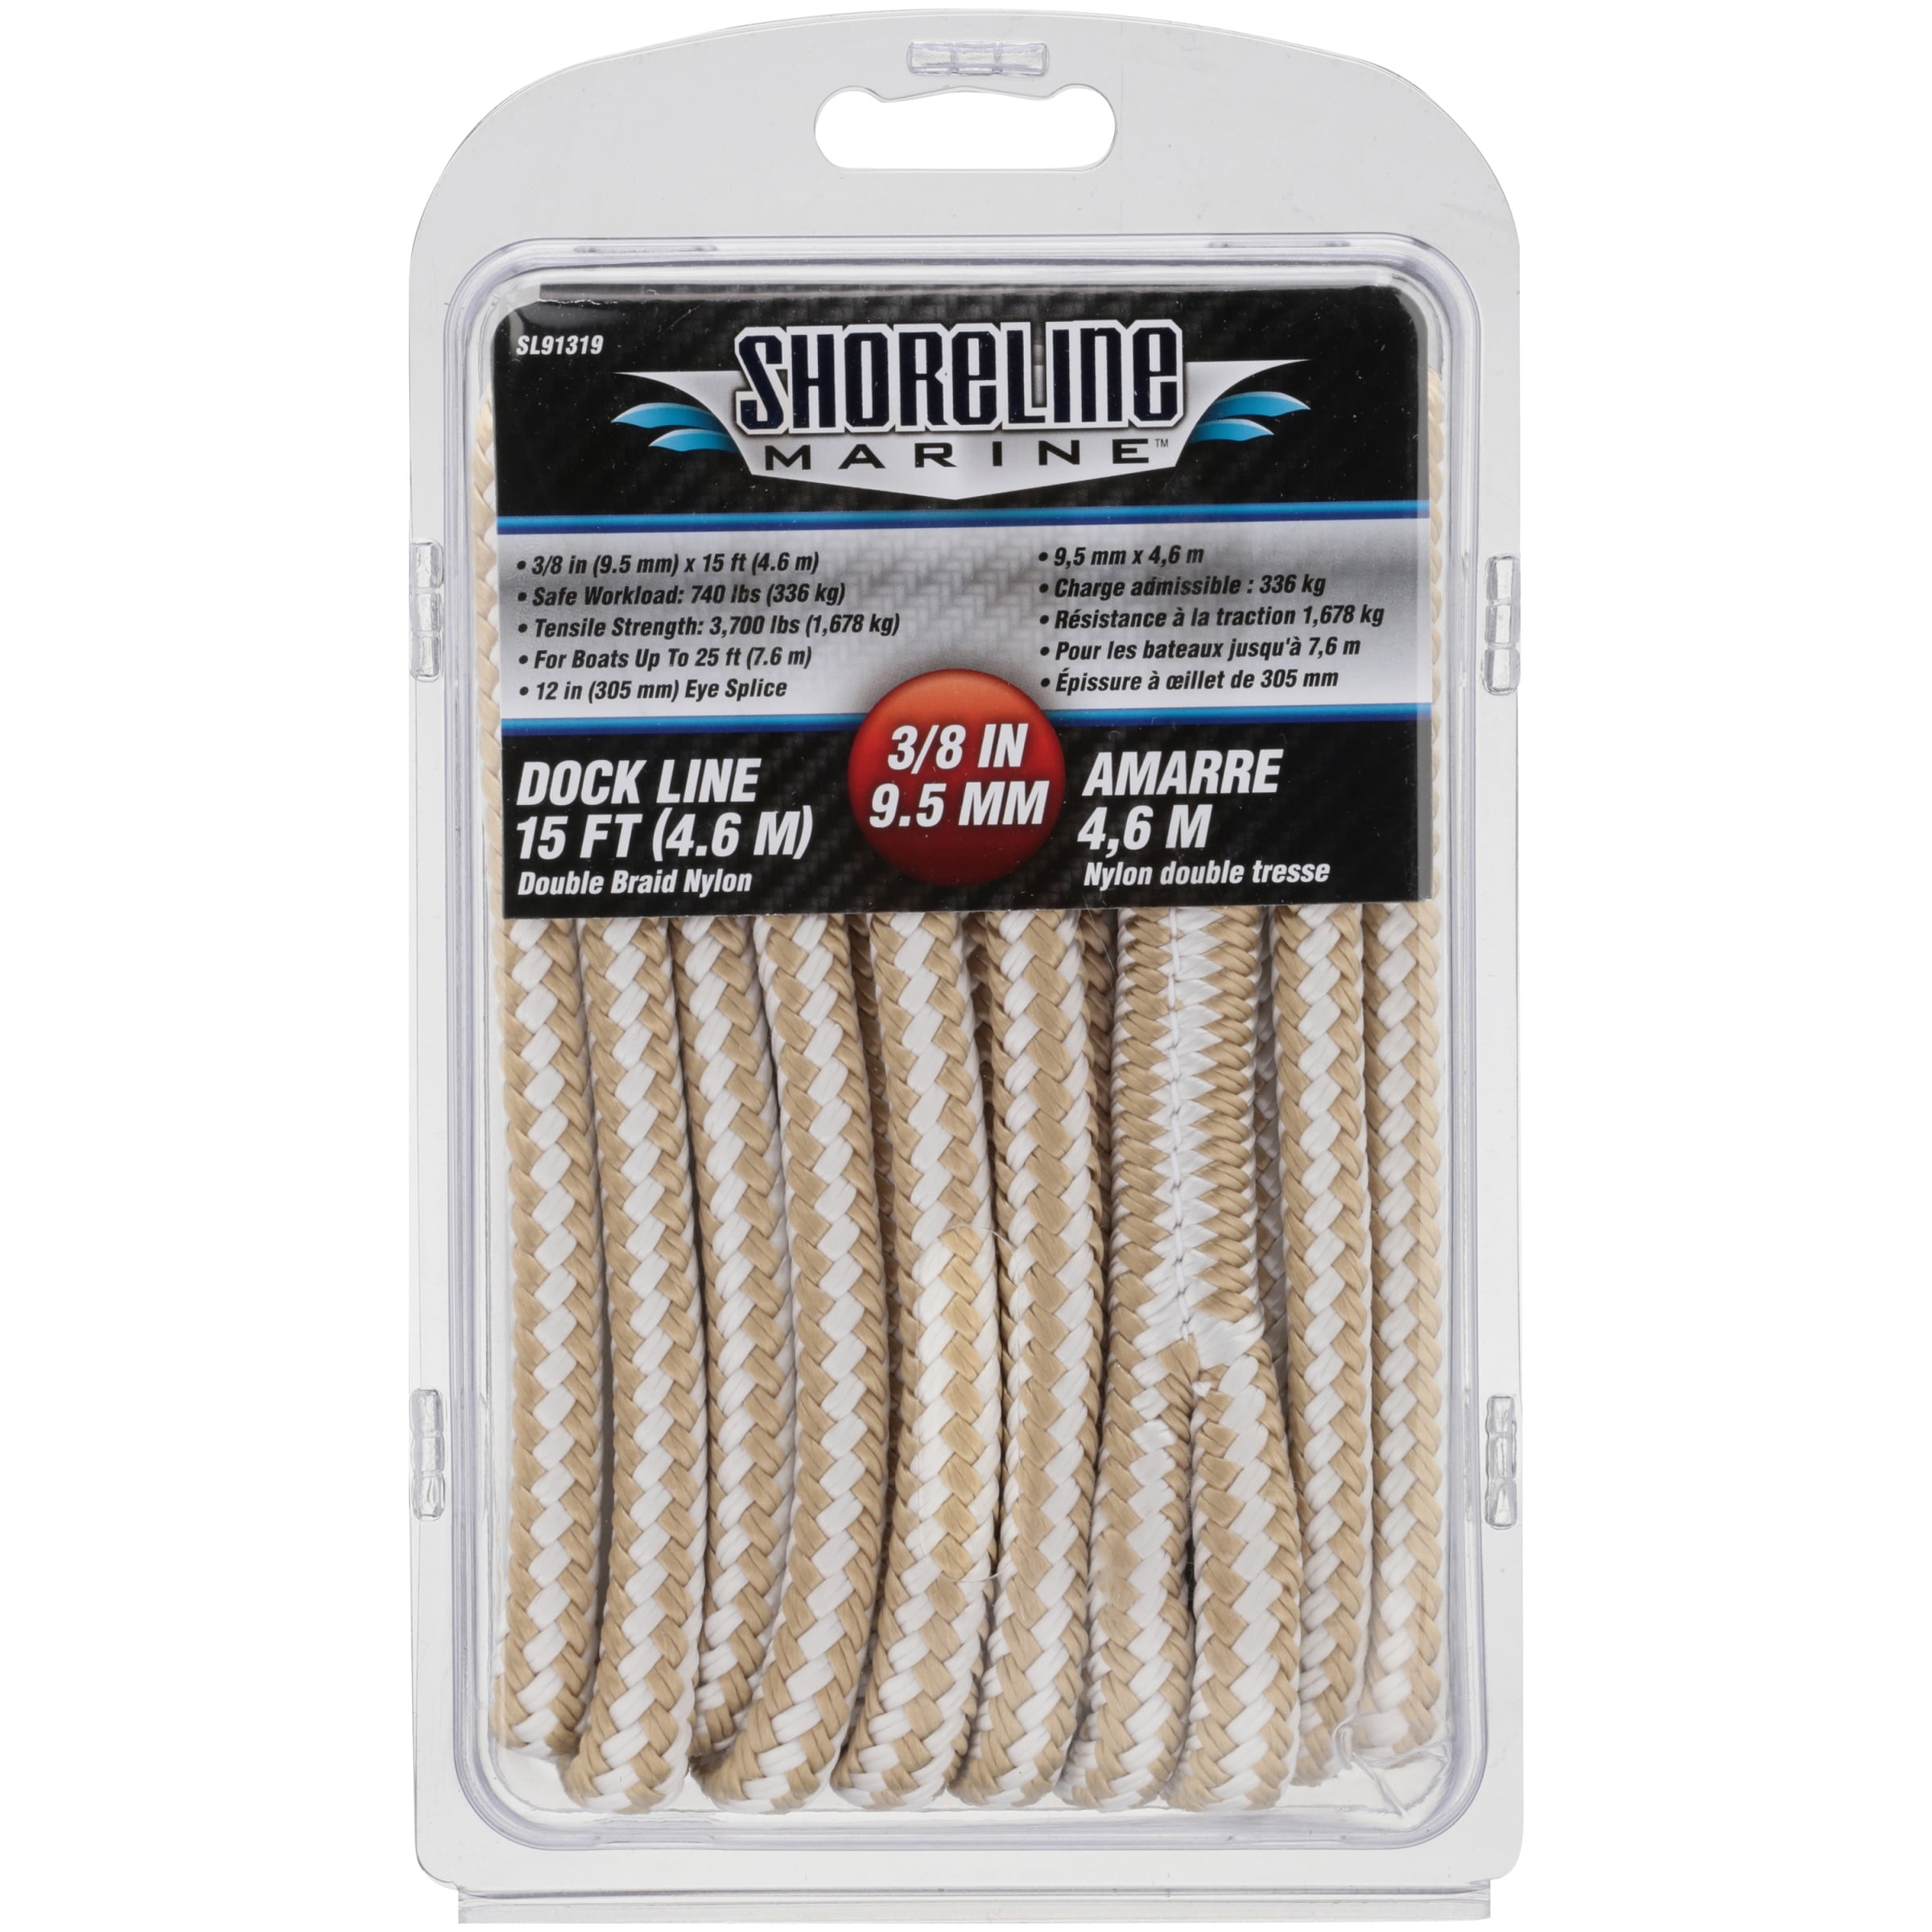 Shoreline Marine Fender Line and Rope Keeper 6 FT 3/8 inch thick braided MFP 